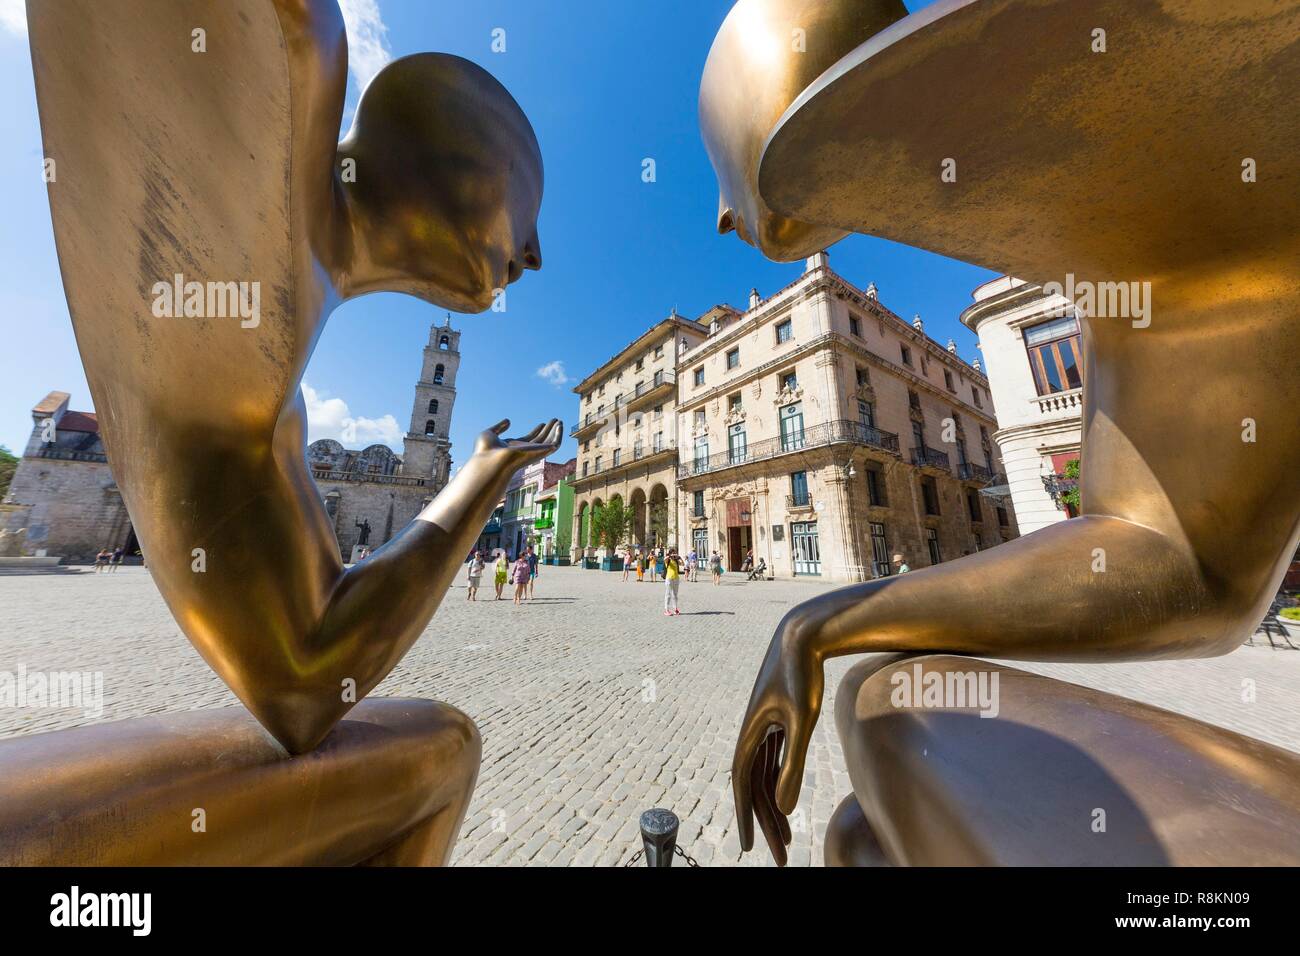 Cuba, Havana, Habana Vieja district classified World Heritage by UNESCO, the Plaza de San Francisco de Asis, sculpture The Conversation of the French sculptor Etienne, the convent San Francisco de Asis in the background Stock Photo